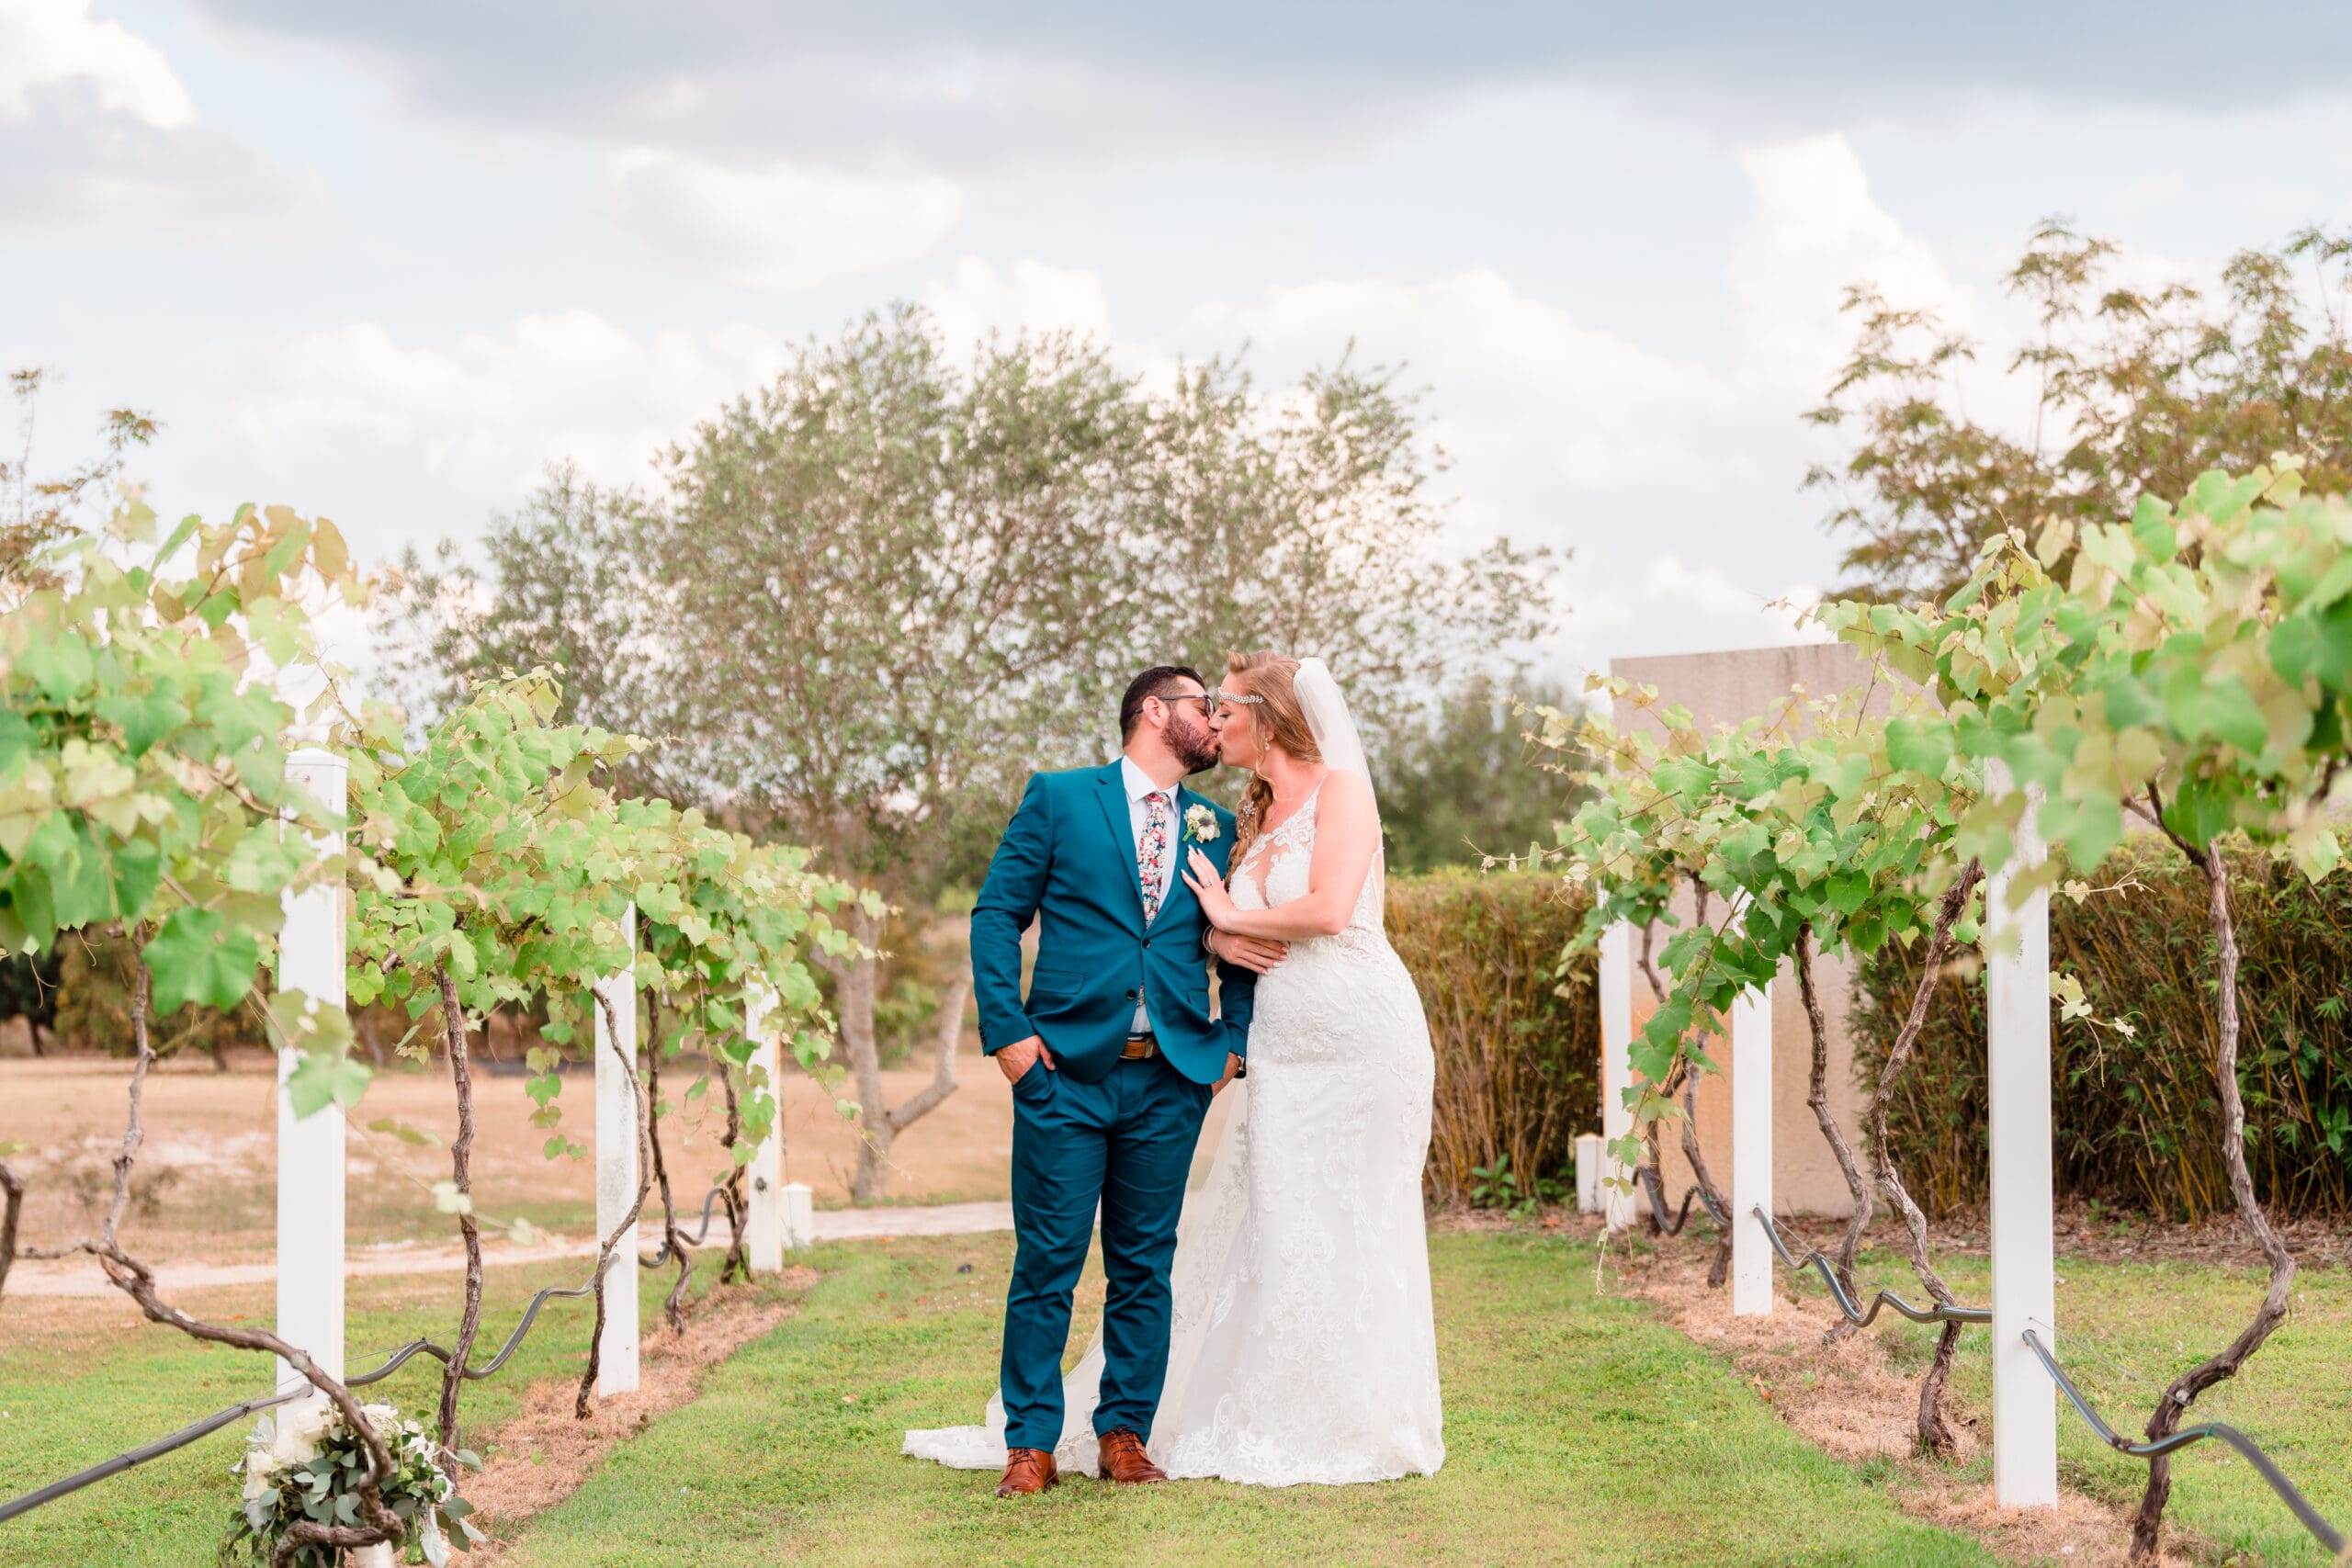 Jerzy Nieves Photography - Stylishly dressed bride and groom sharing a passionate kiss, showcasing their love and fashion-forward elegance at All Inclusive Weddings Orlando